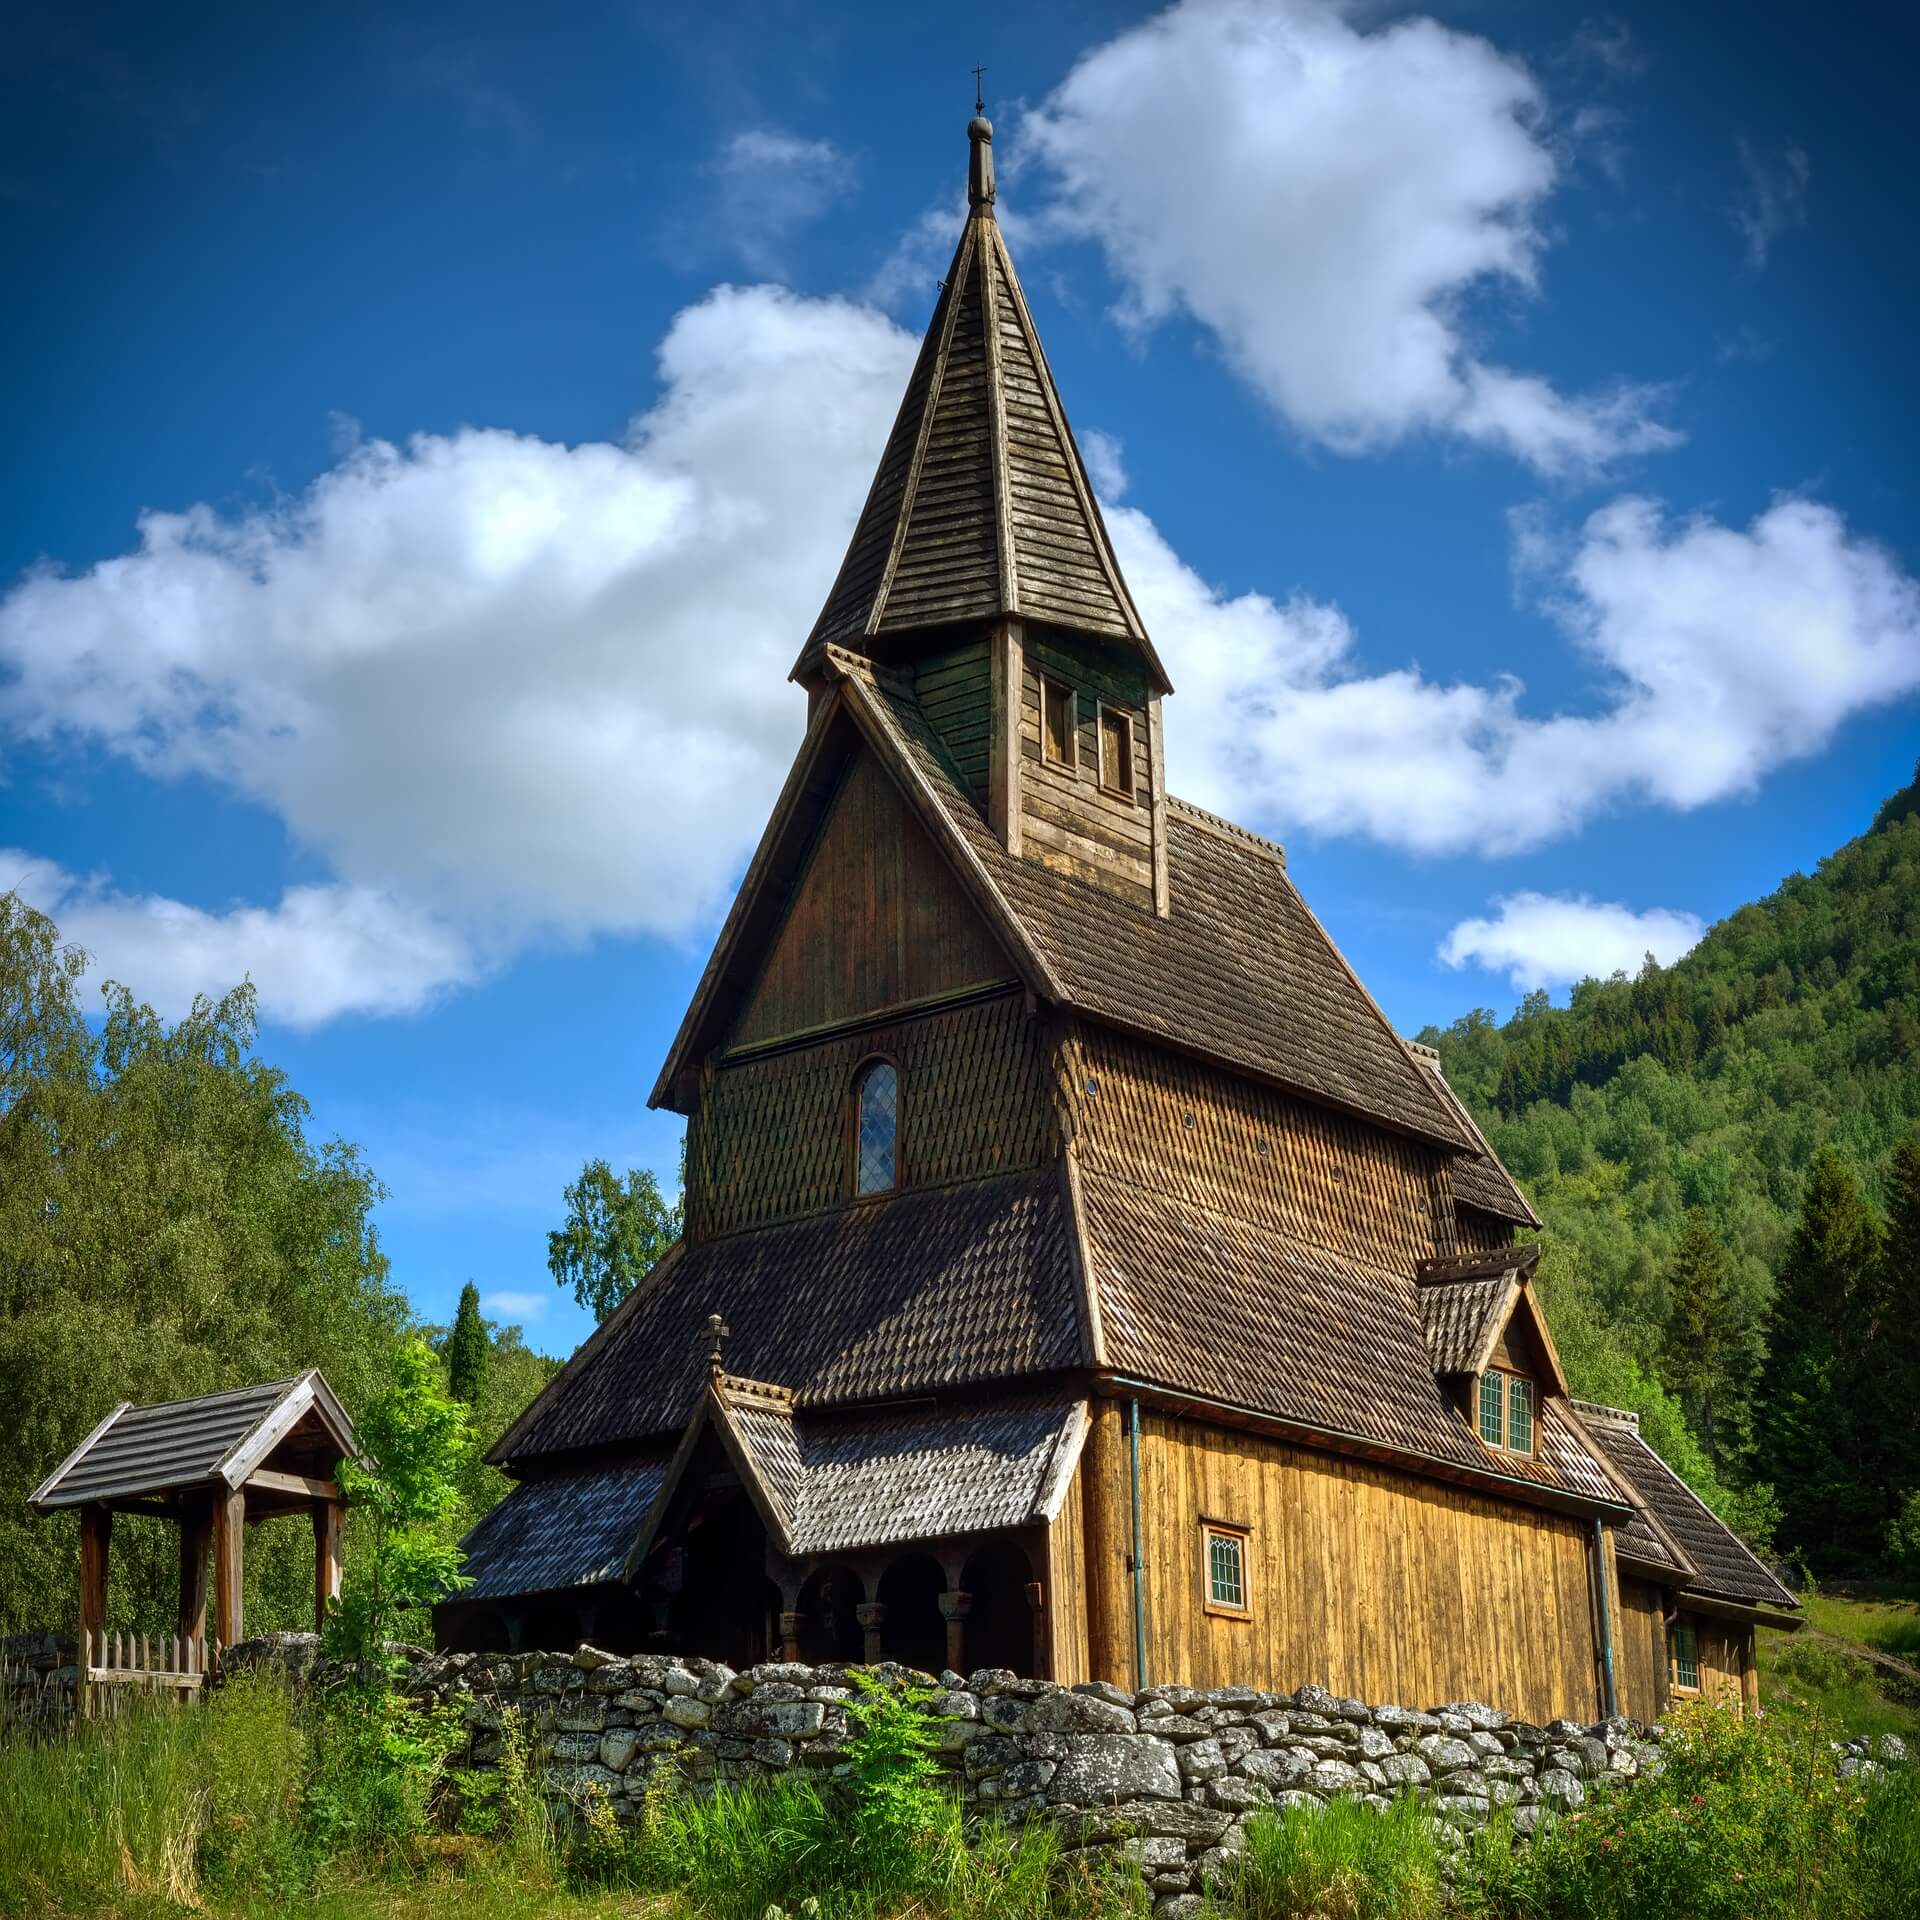 Sognefjord: Urnes Stave Church